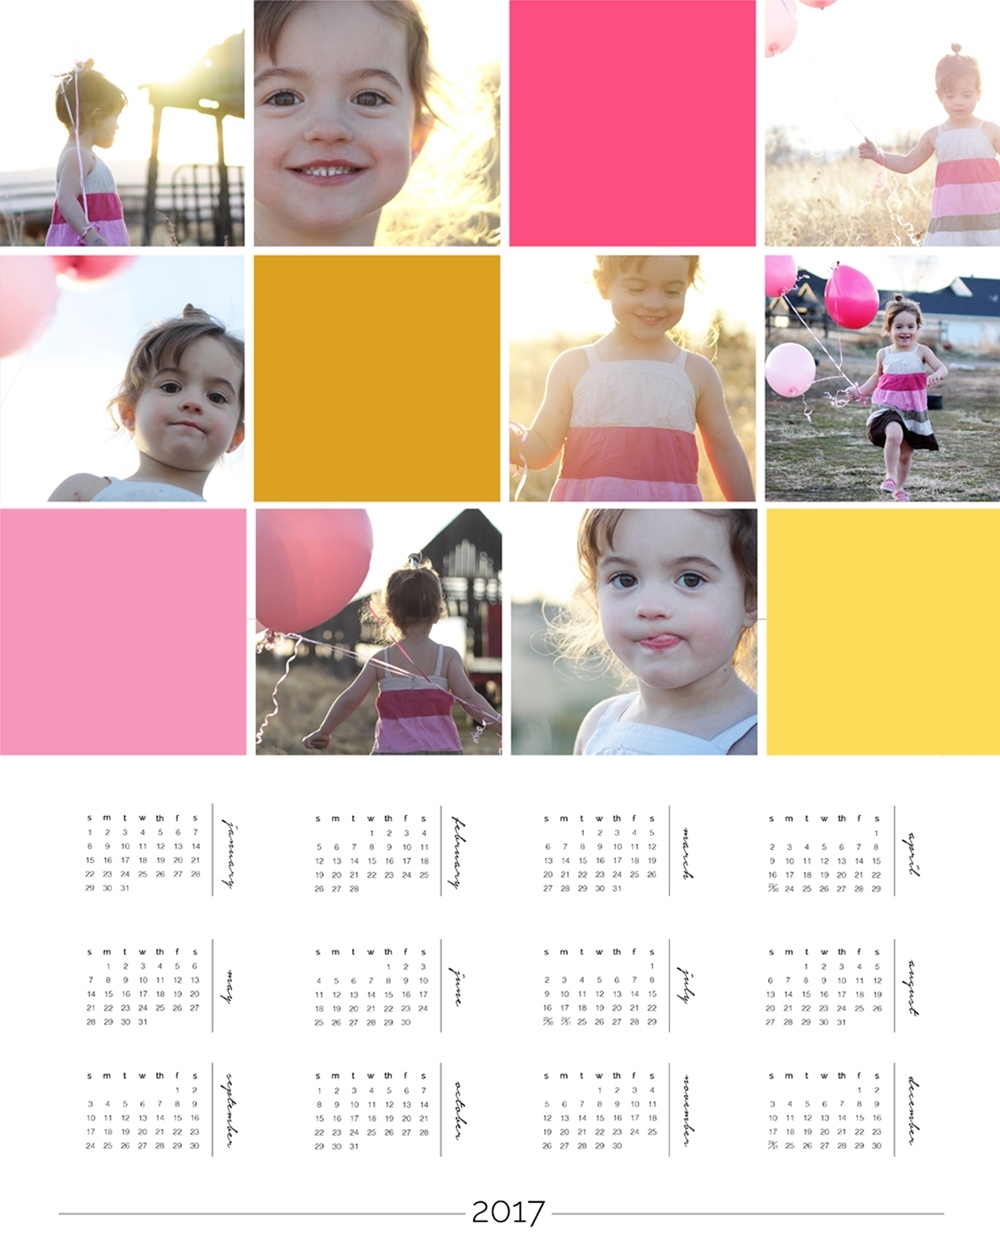 Make A Personalized Photo Wall Calendar + Photoshop Elements How To Make A Calendar Template In Photoshop